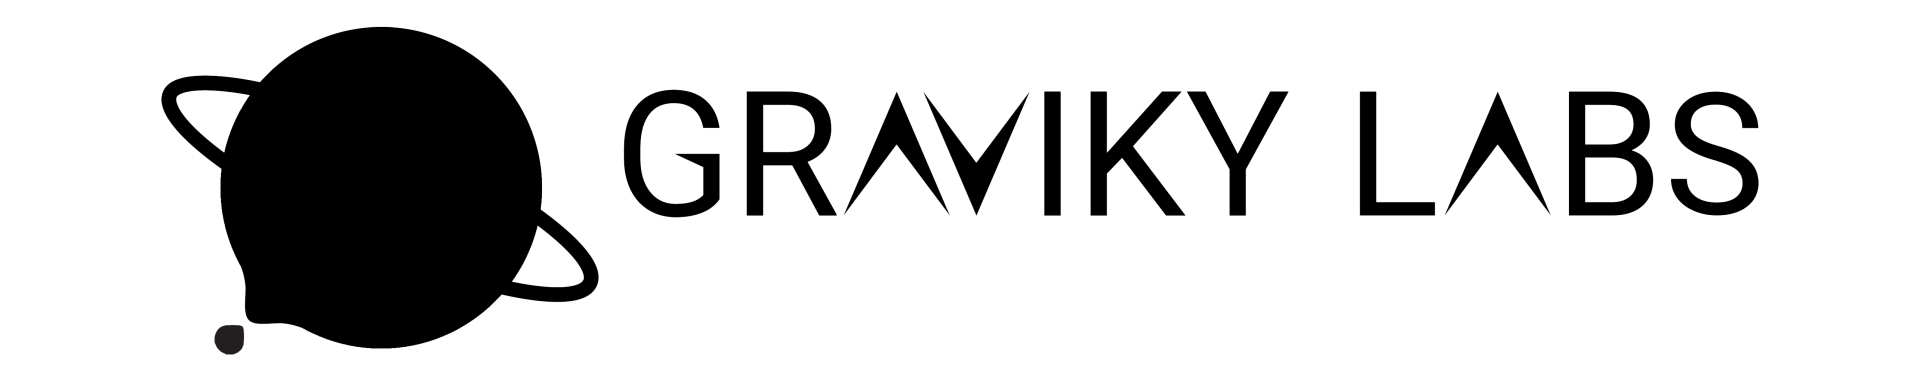 Graviky Labs: Producing sustainable printing inks from air pollution that help maintain carbon neutrality.